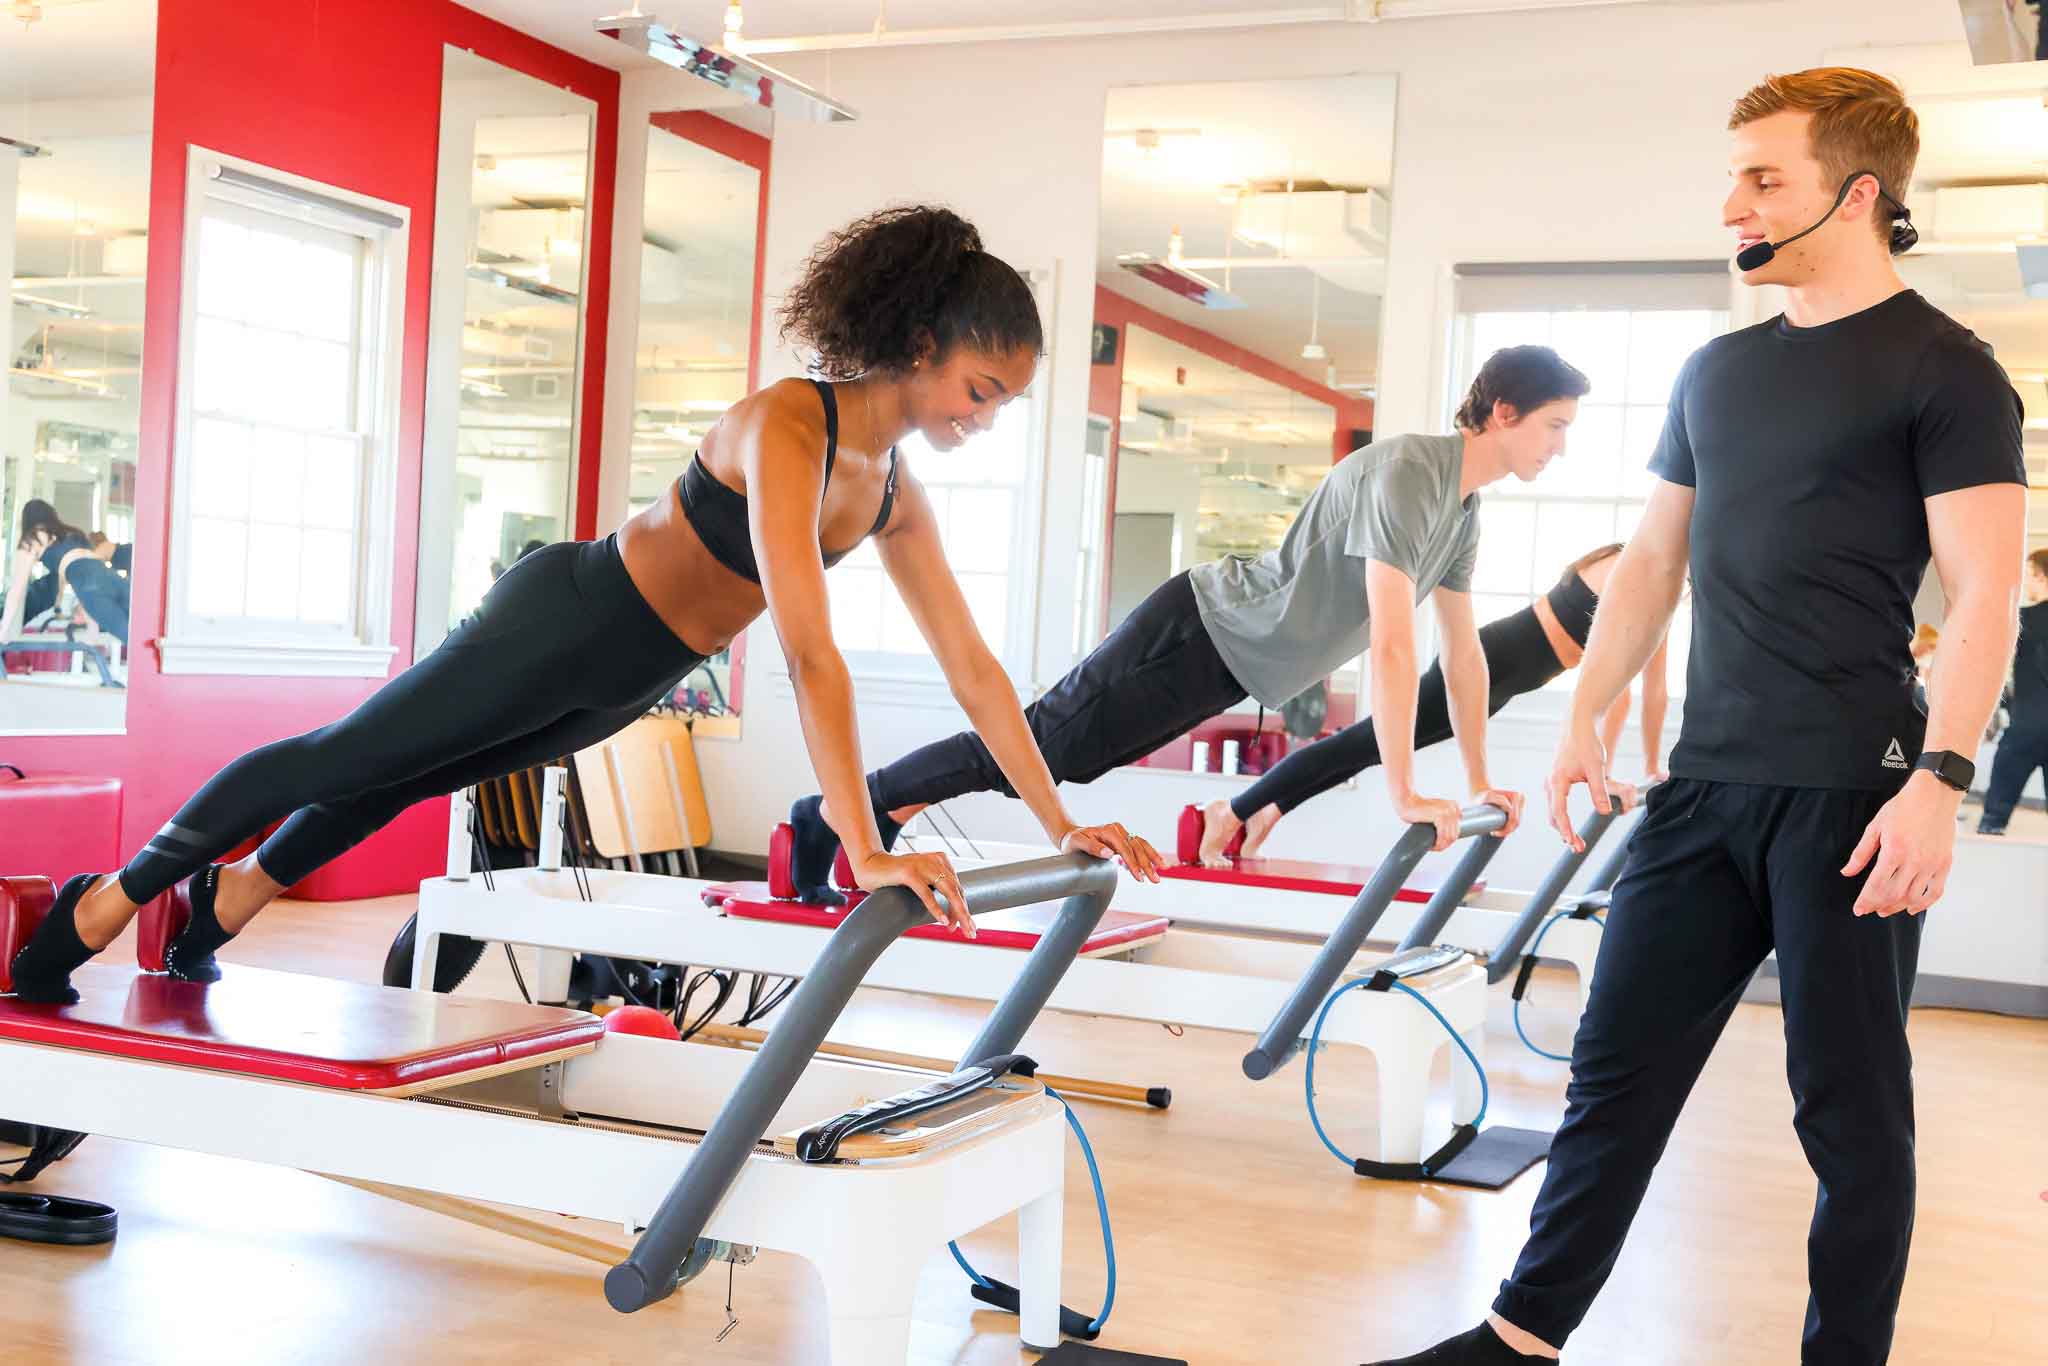 reformer pilates class taught by RTR Pilates